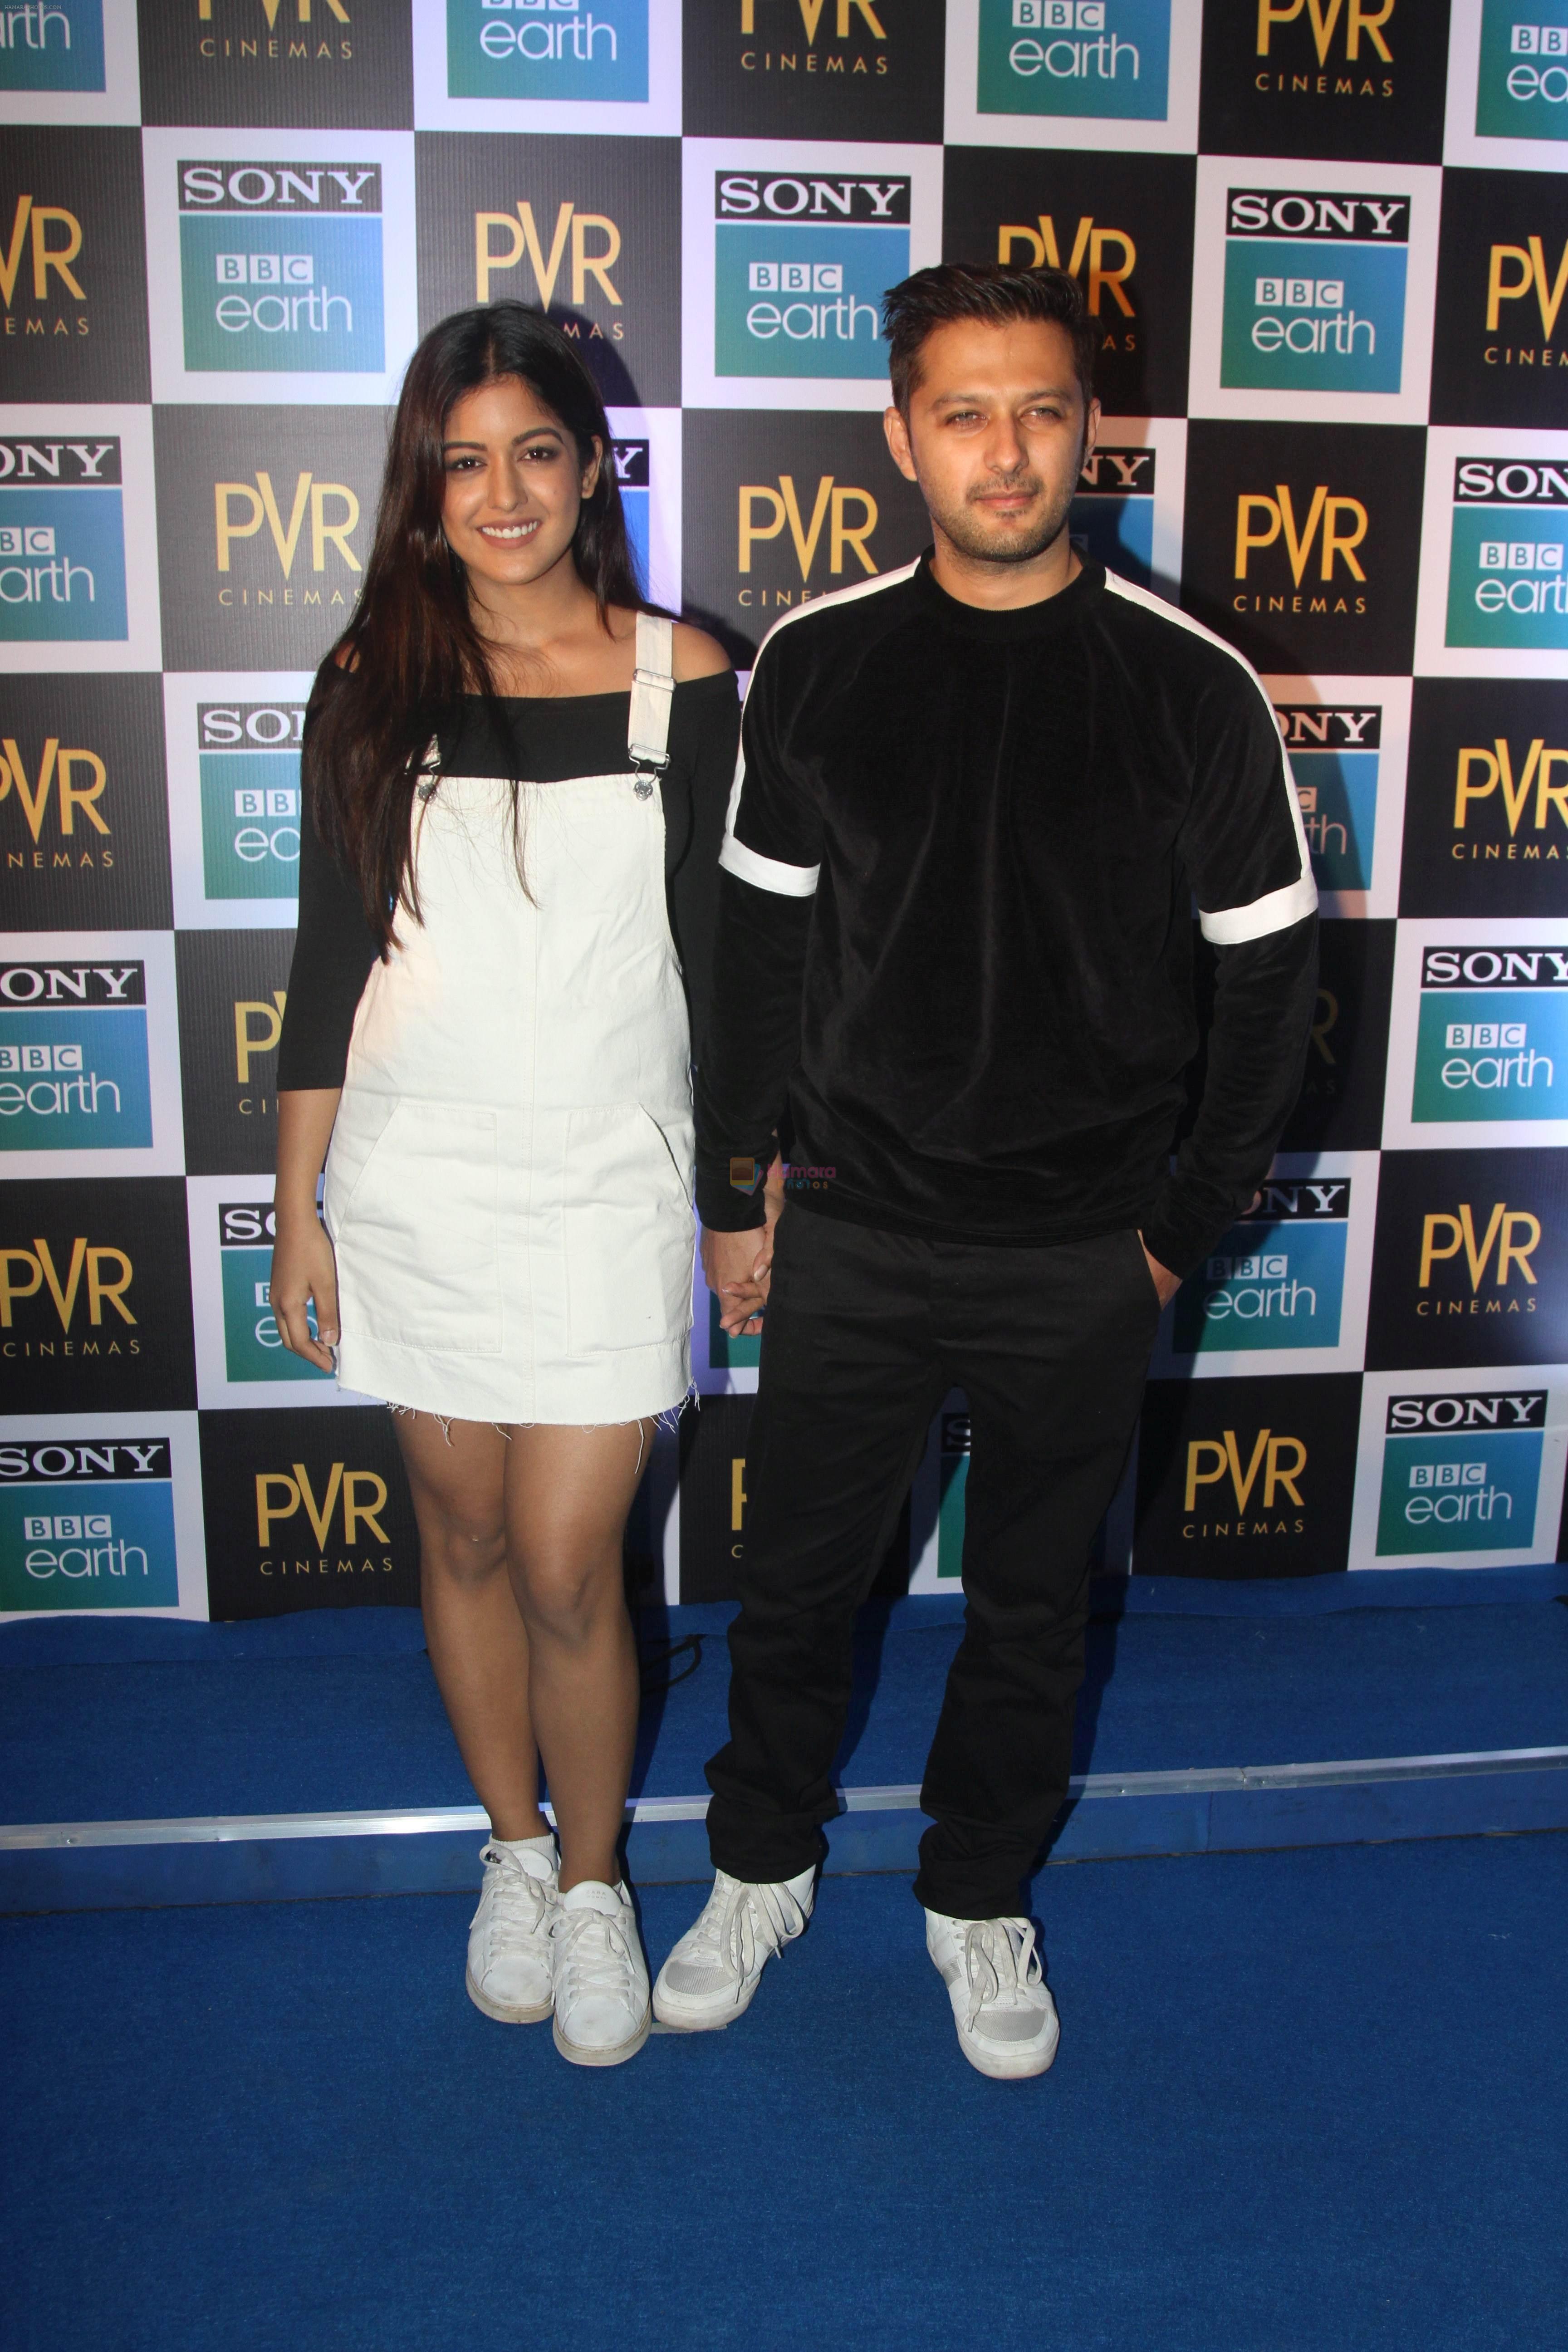 Vatsal Seth at the Screening of Sony BBC Earth's film Blue Planet 2 at pvr icon in andheri on 15th May 2018